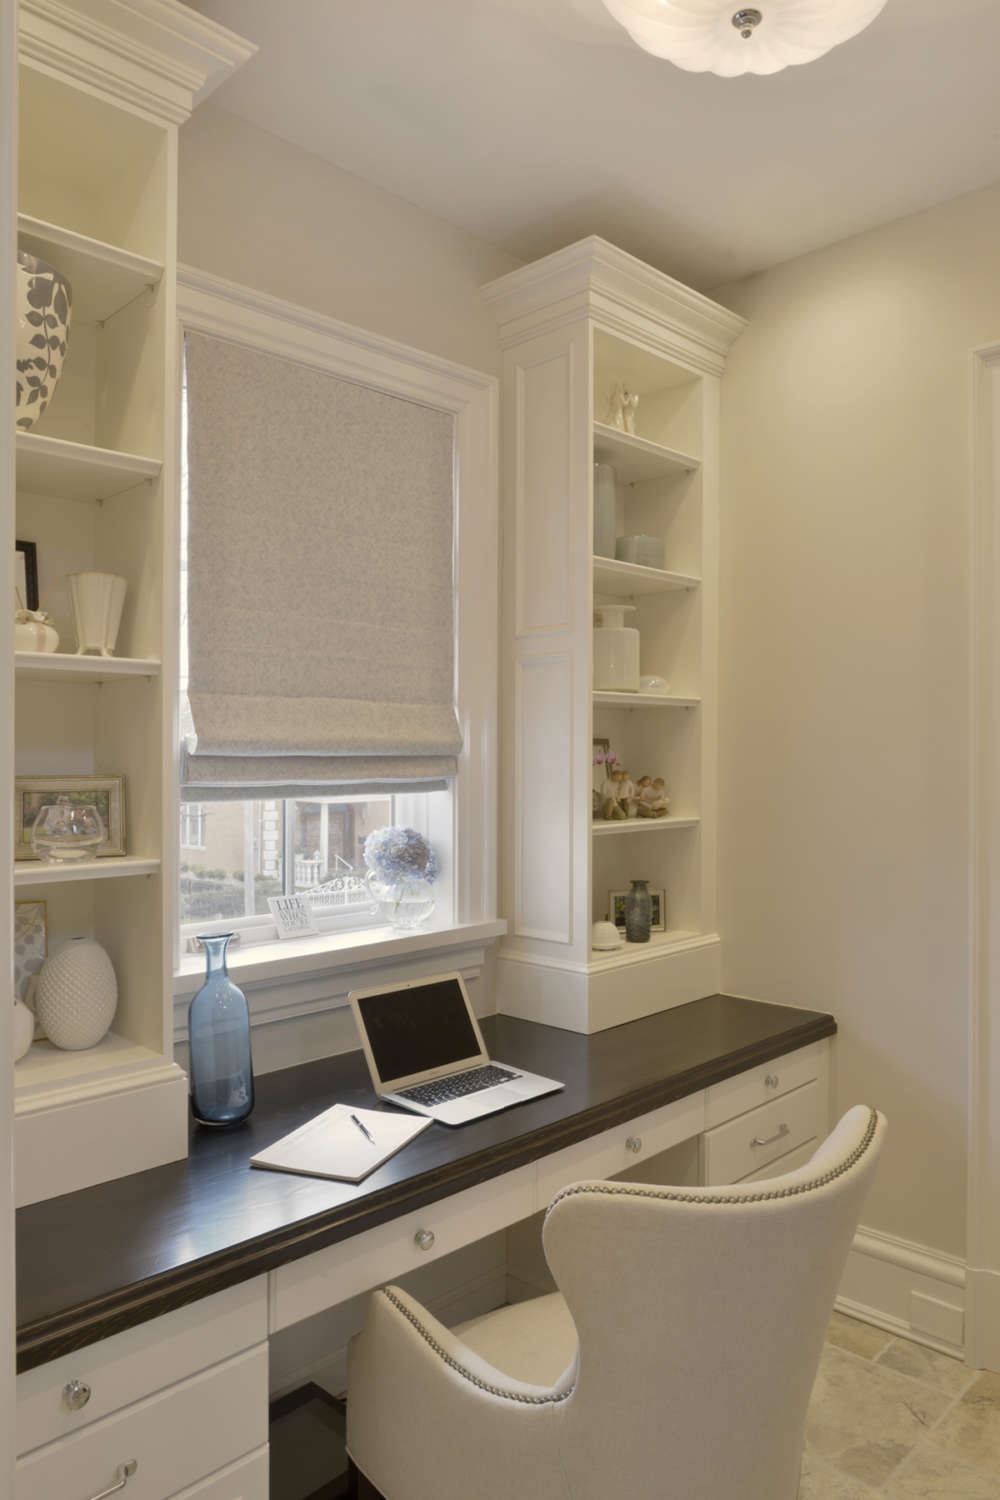 Home office features a classic white painted, custom desk with round polished stainless hardware and espresso brown top. The desk is positioned under a window with flax colored roman fabric shade flanked by custom white painted built-in open shelving.